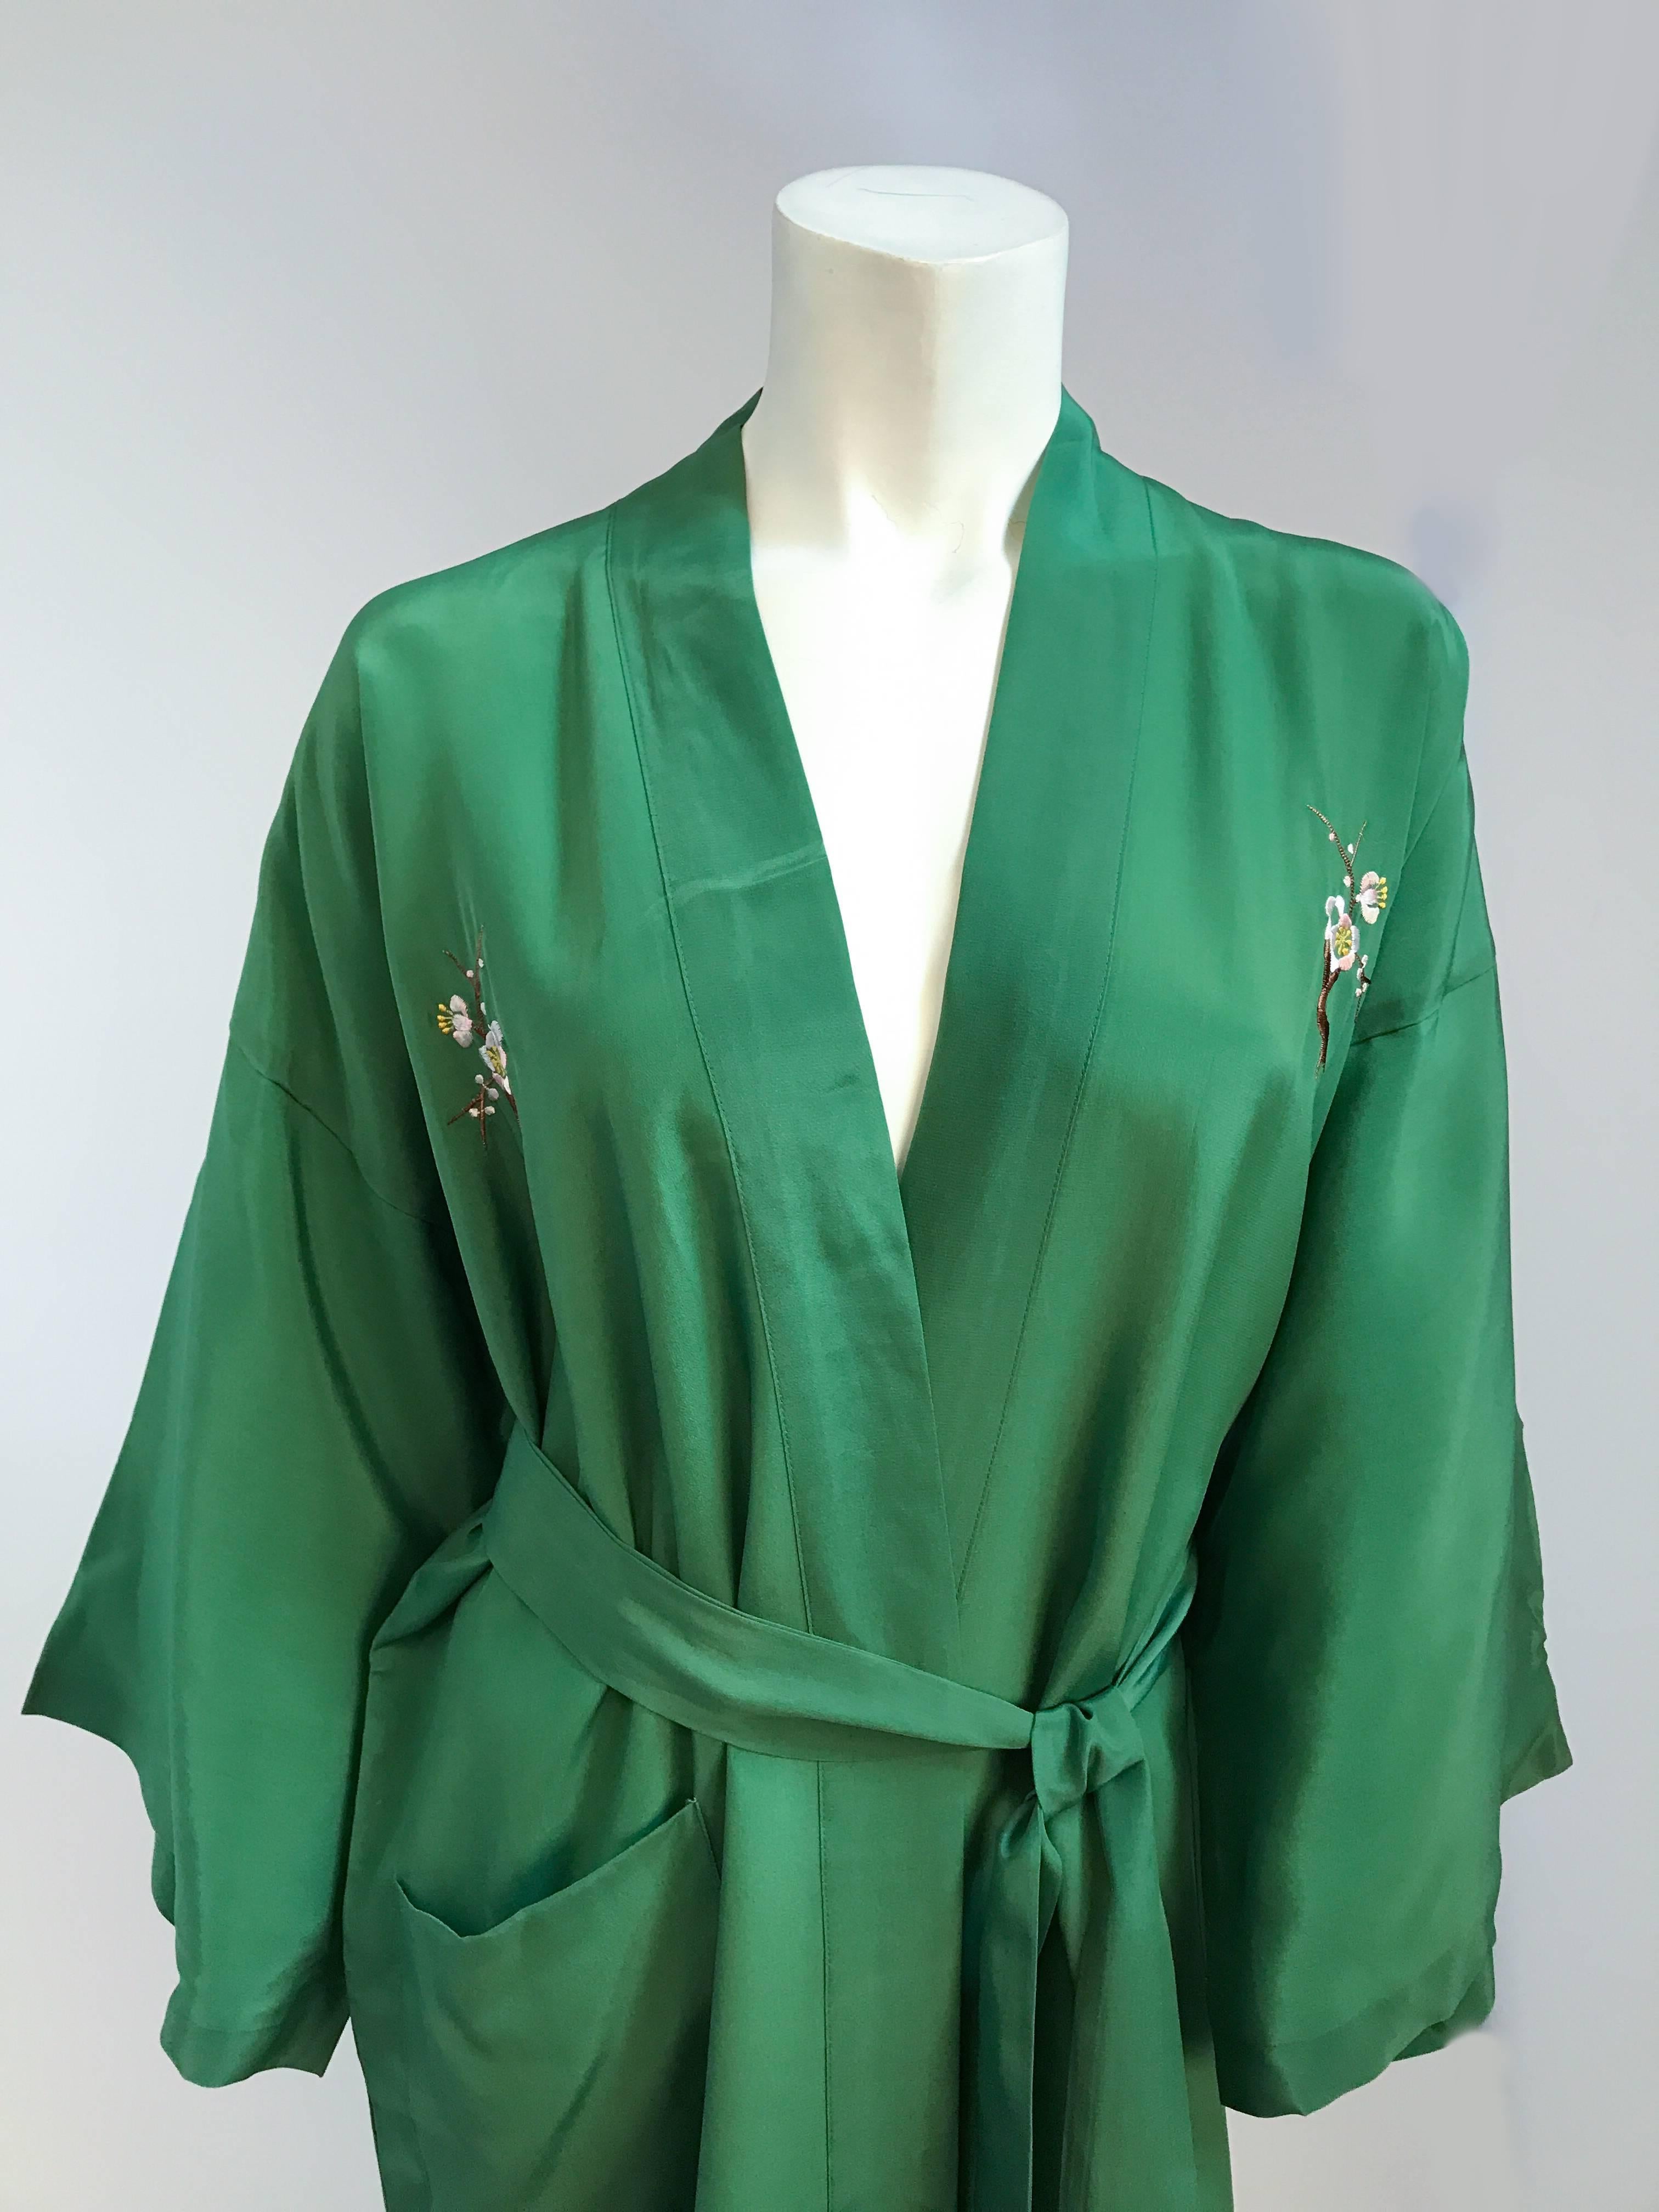 1960's Green Embroidered Kimono. Green Kimono with cherry blossom embroidery. Matching waist sash and one pocket in the front.  